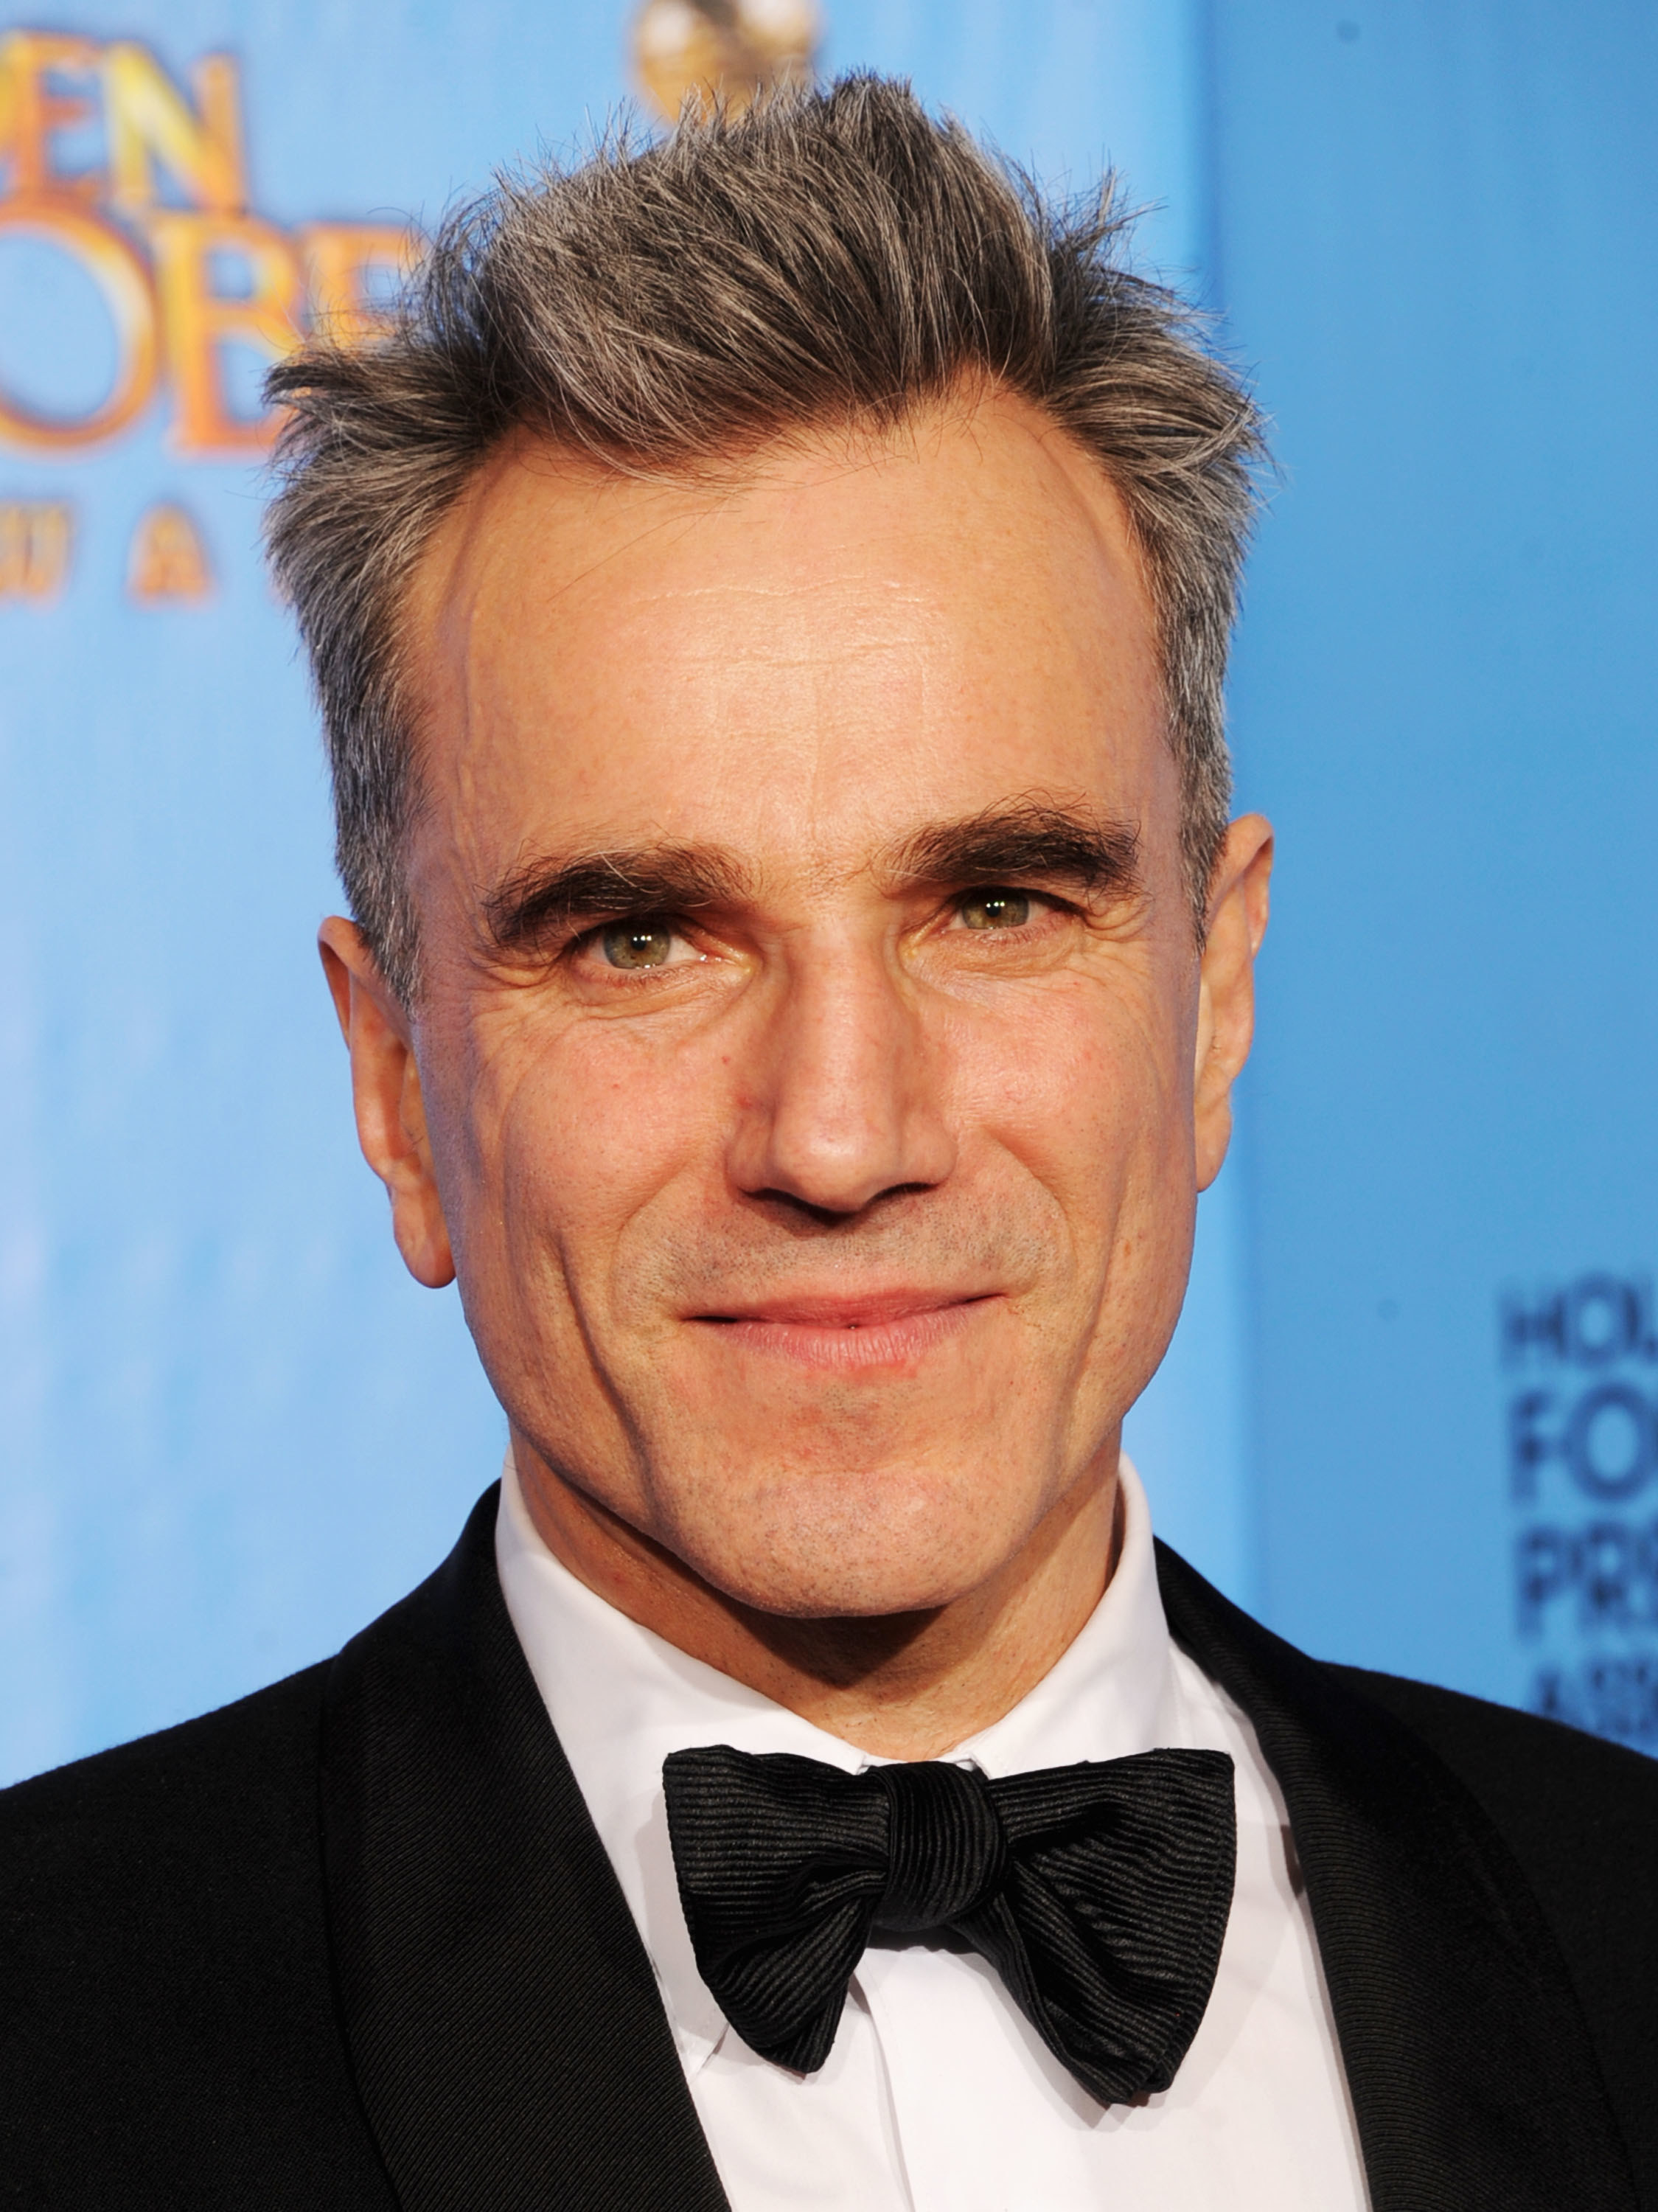 Daniel Day Lewis smiling on a red carpet